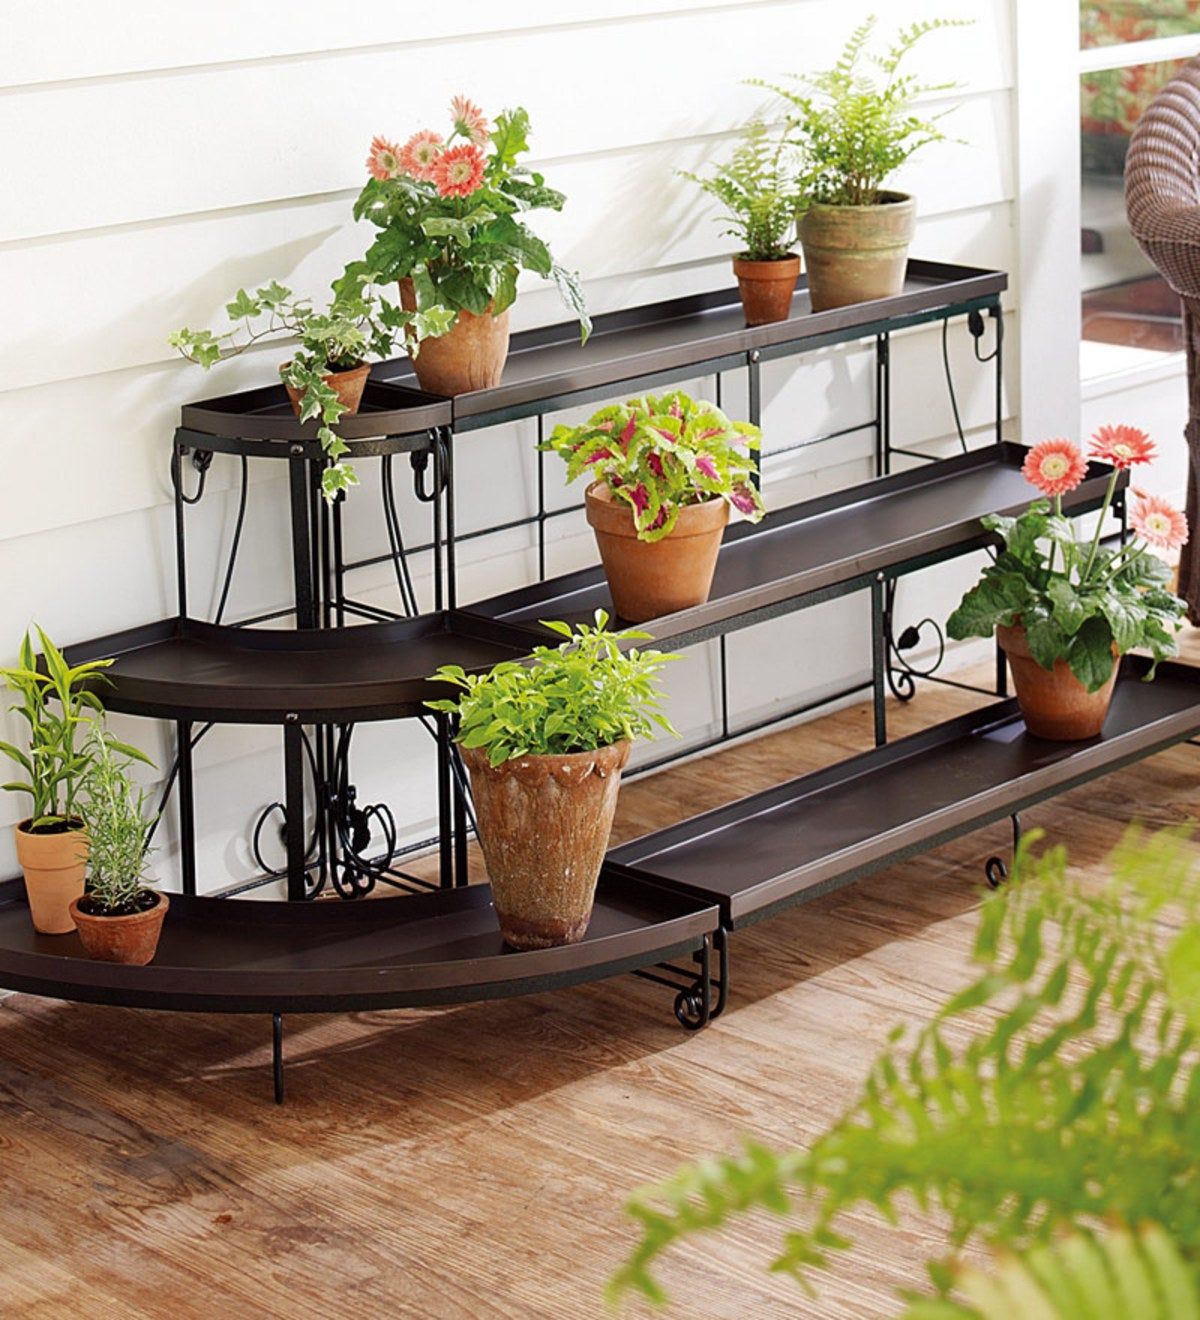 Three Tier Embellished Steel Plant Stand Set | Plowhearth Inside Three Tier Plant Stands (View 9 of 15)